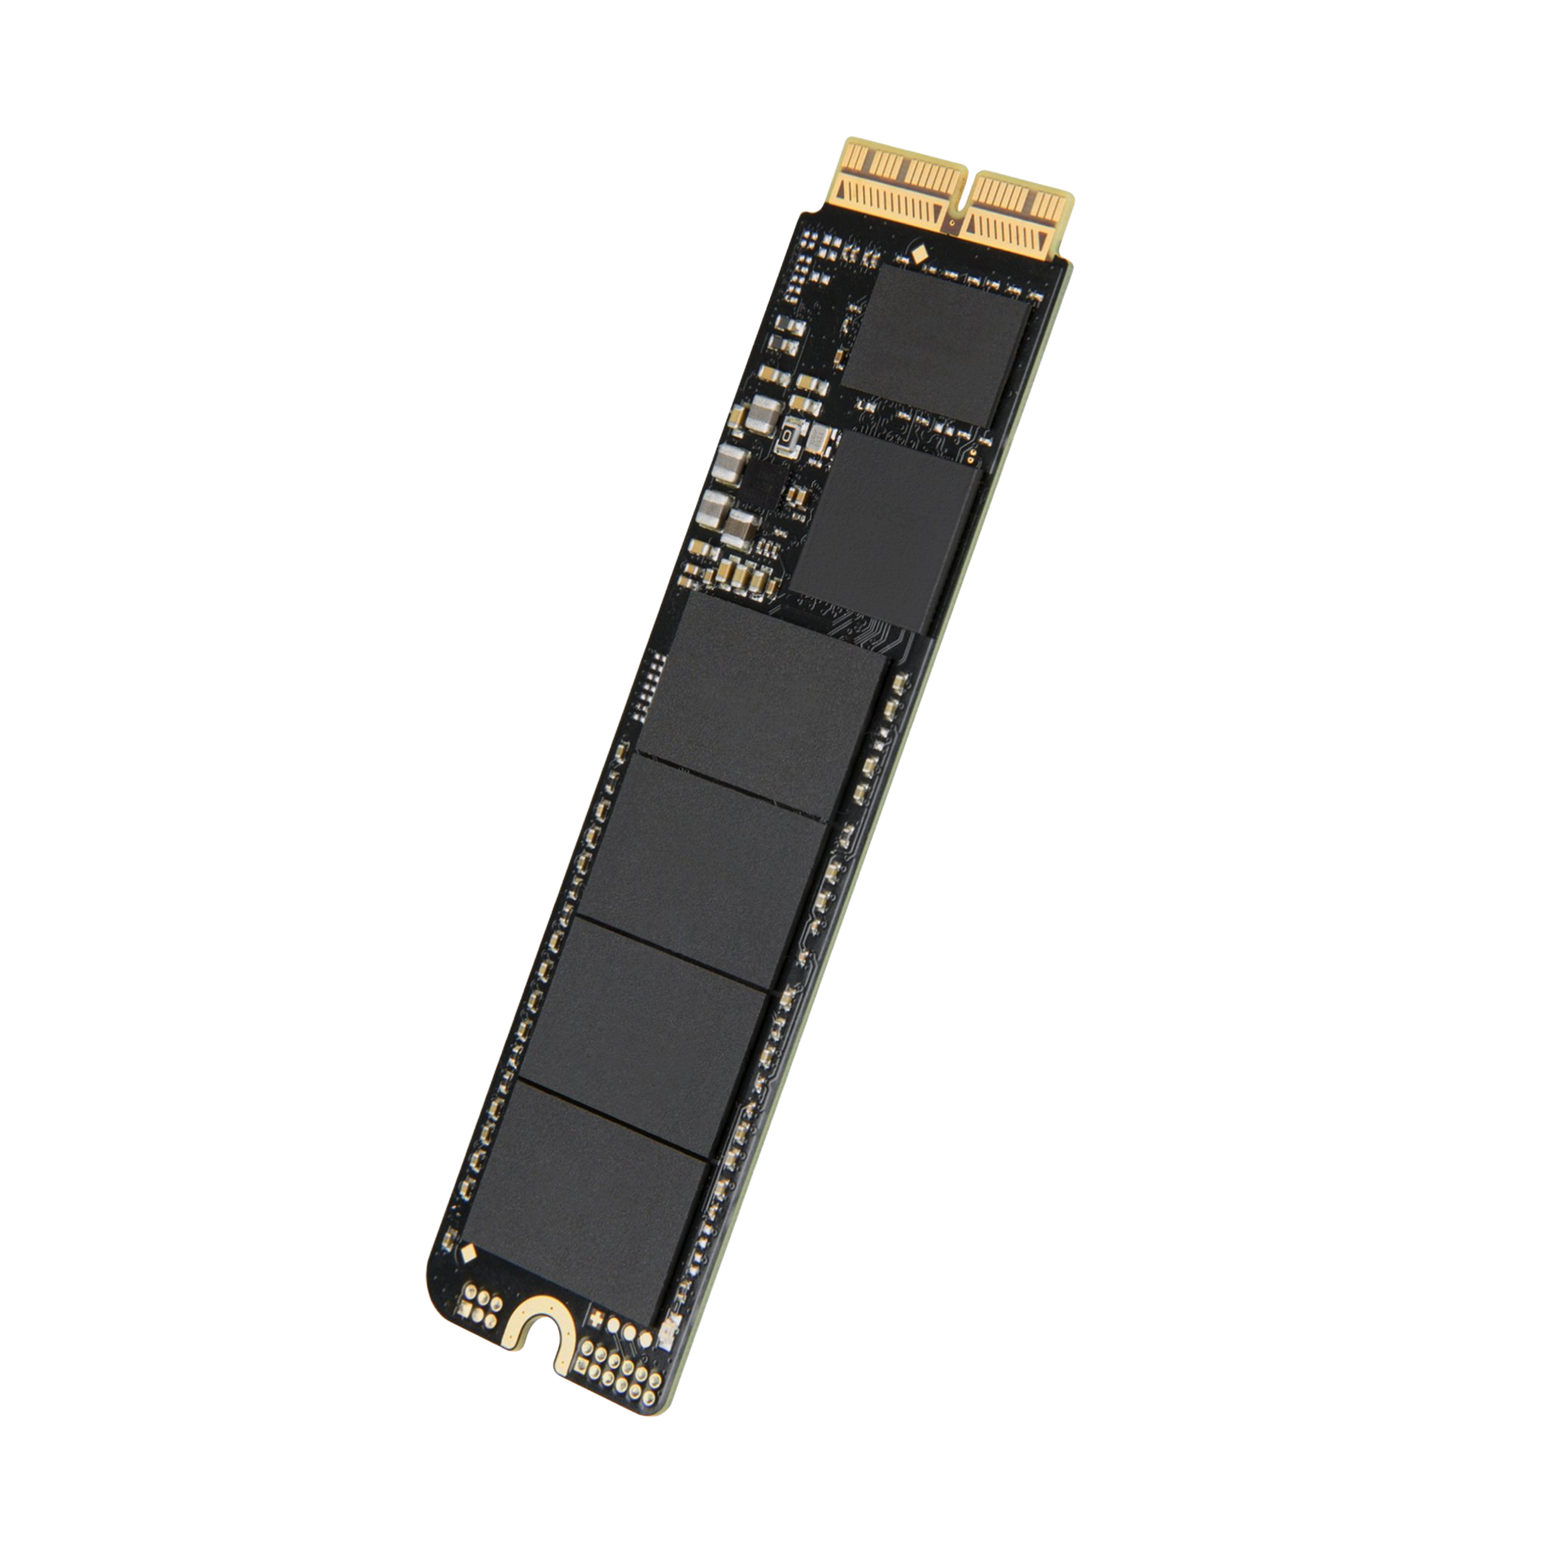 Transcend 960GB Jet Drive 820 SSD Only for MacBook Pro (Late 2013 - Early 2015), MacBook Air (Mid 2013 - Early 2015), Mac mini (Late 2014), Mac Pro (Late 2013) - AHCI Gen3 x2 - Discontinued